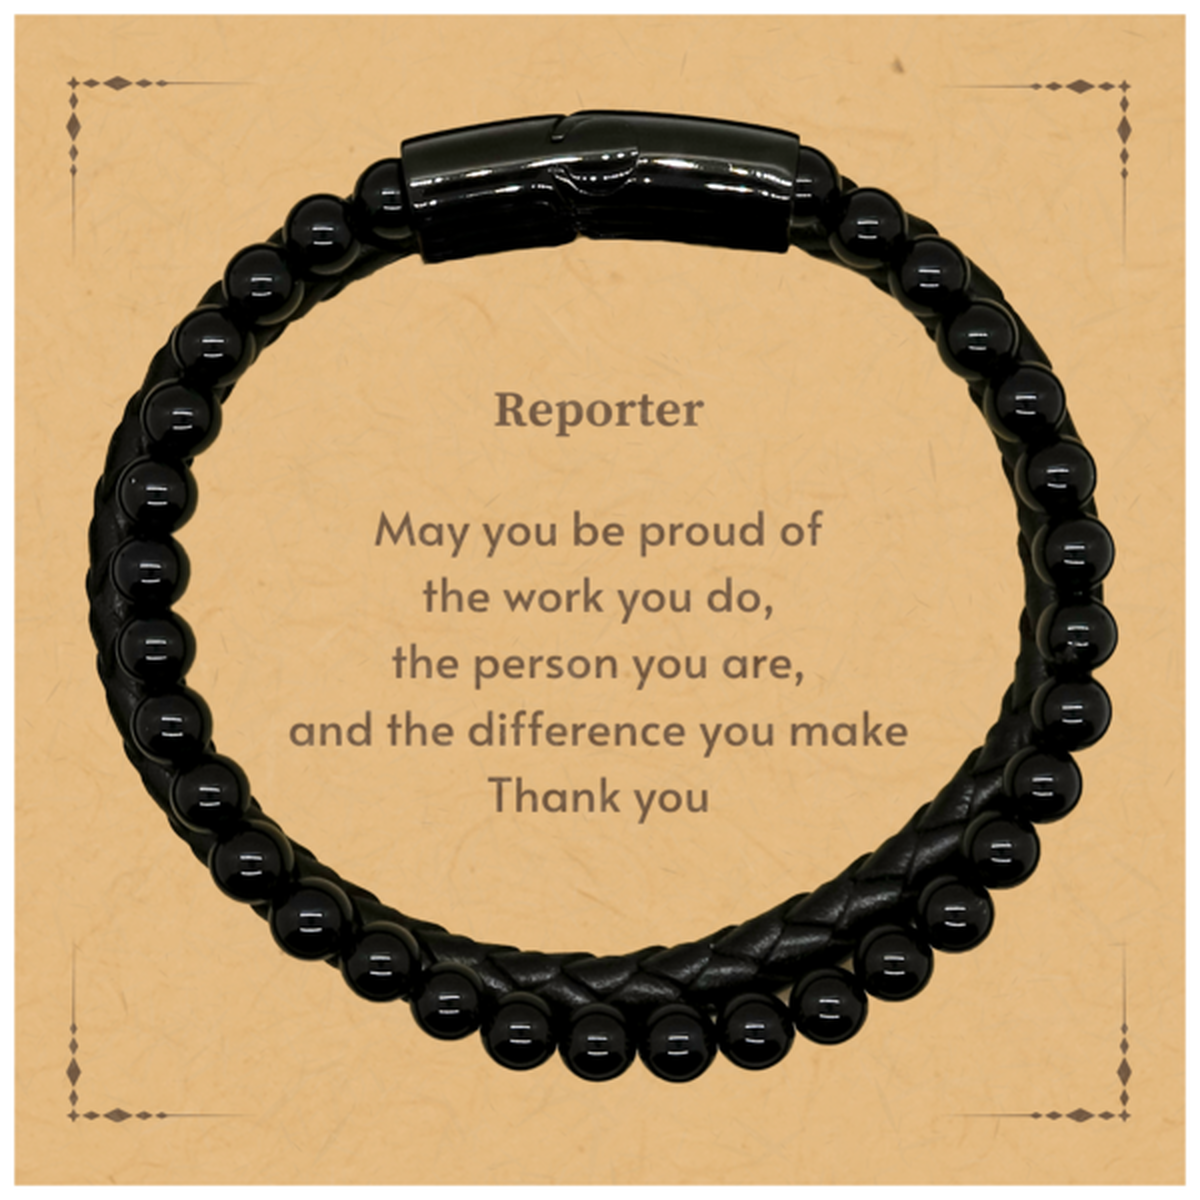 Heartwarming Stone Leather Bracelets Retirement Coworkers Gifts for Reporter, Reporter May You be proud of the work you do, the person you are Gifts for Boss Men Women Friends